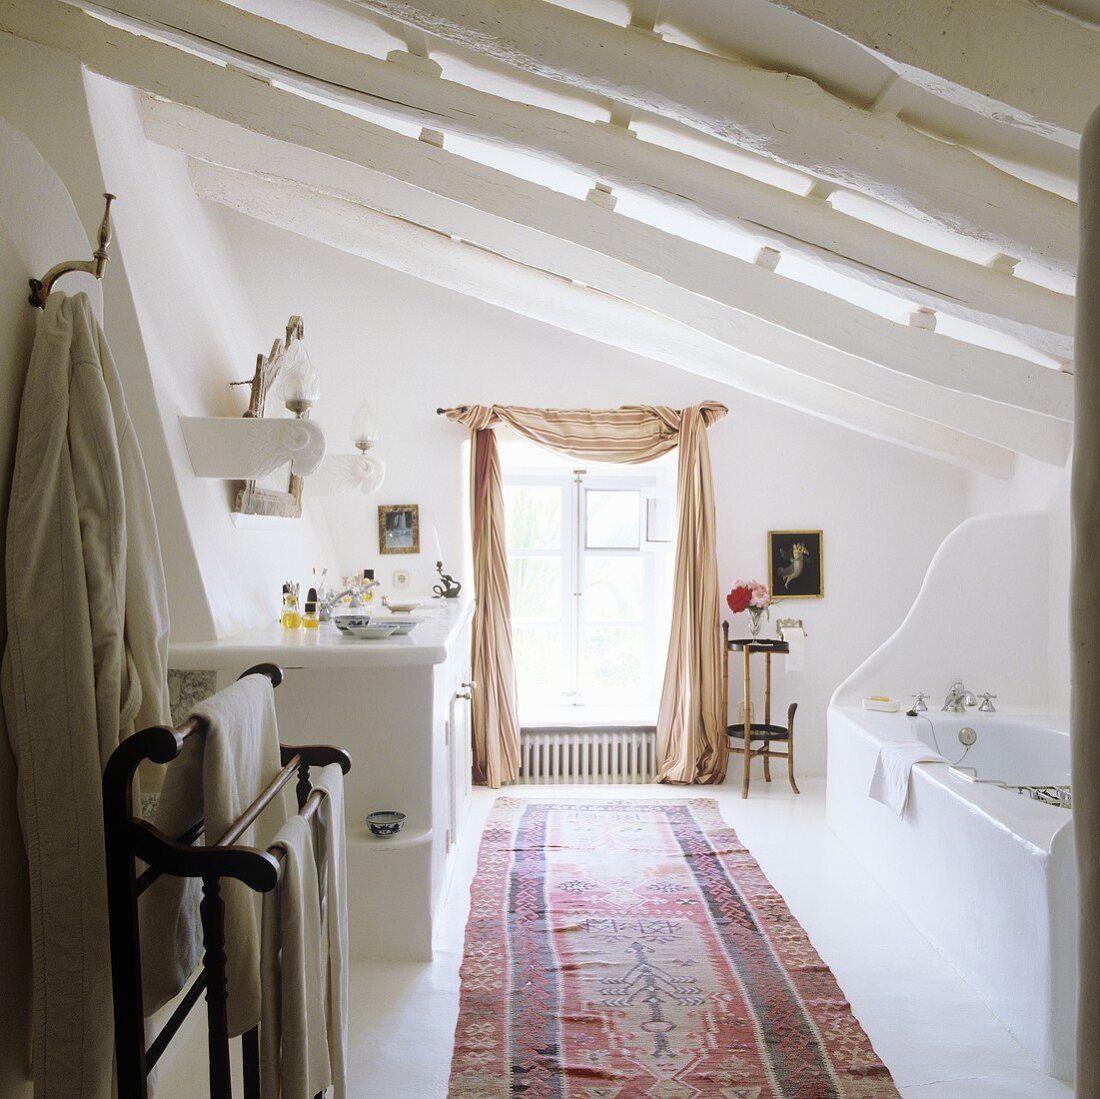 Mediterranean bath under a ceiling with wooden beams painted white and carpet runner in front of a window with curtains draped like a shawl